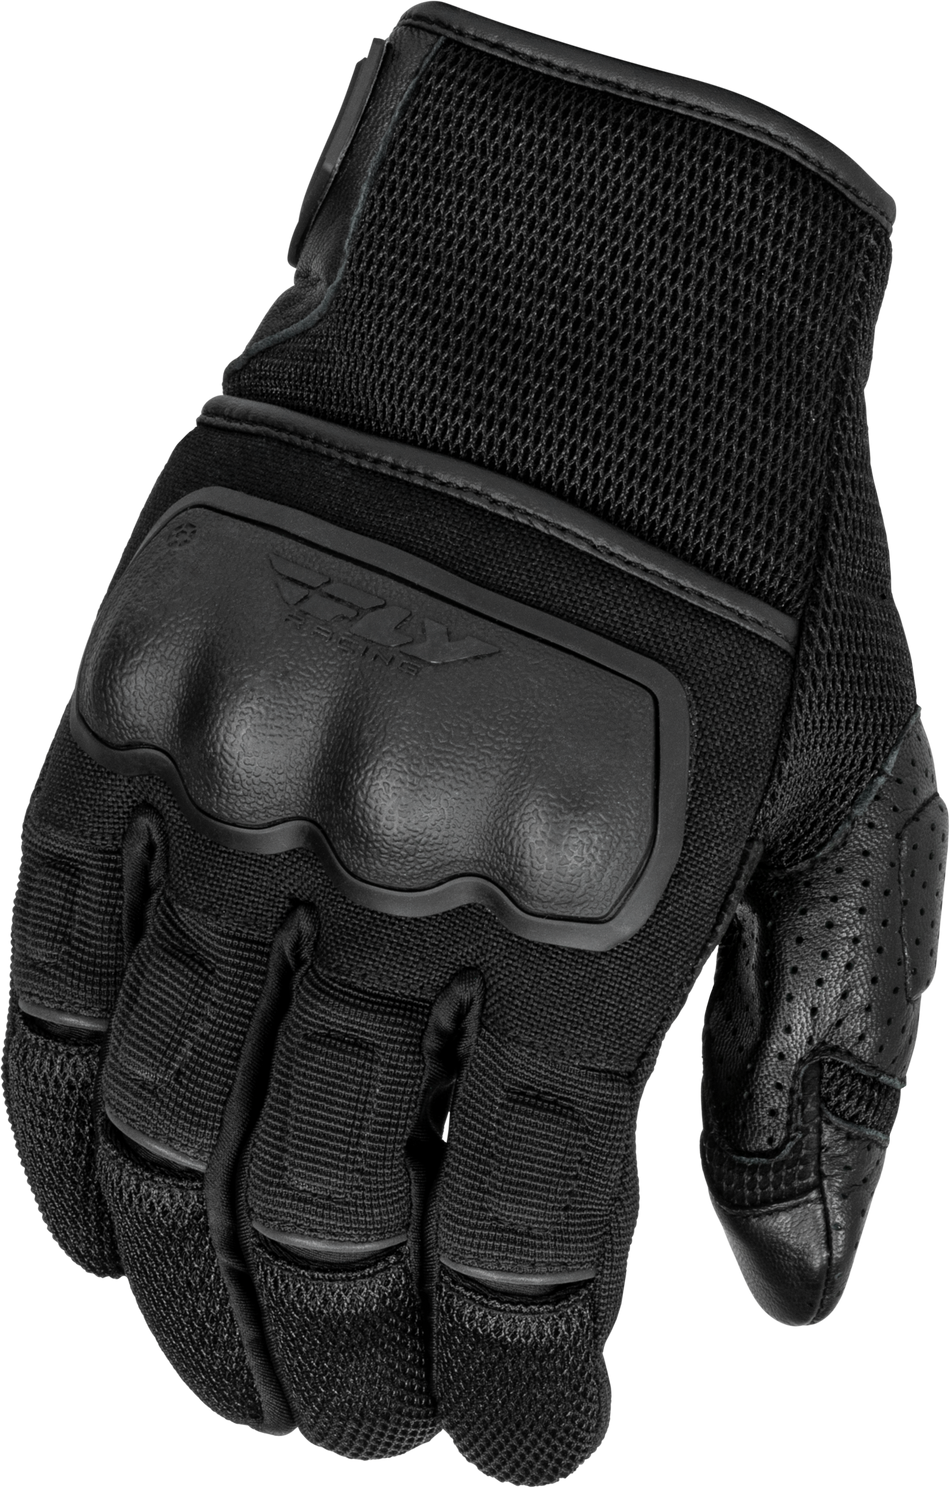 FLY RACING Coolpro Force Gloves Black Sm 476-4125S